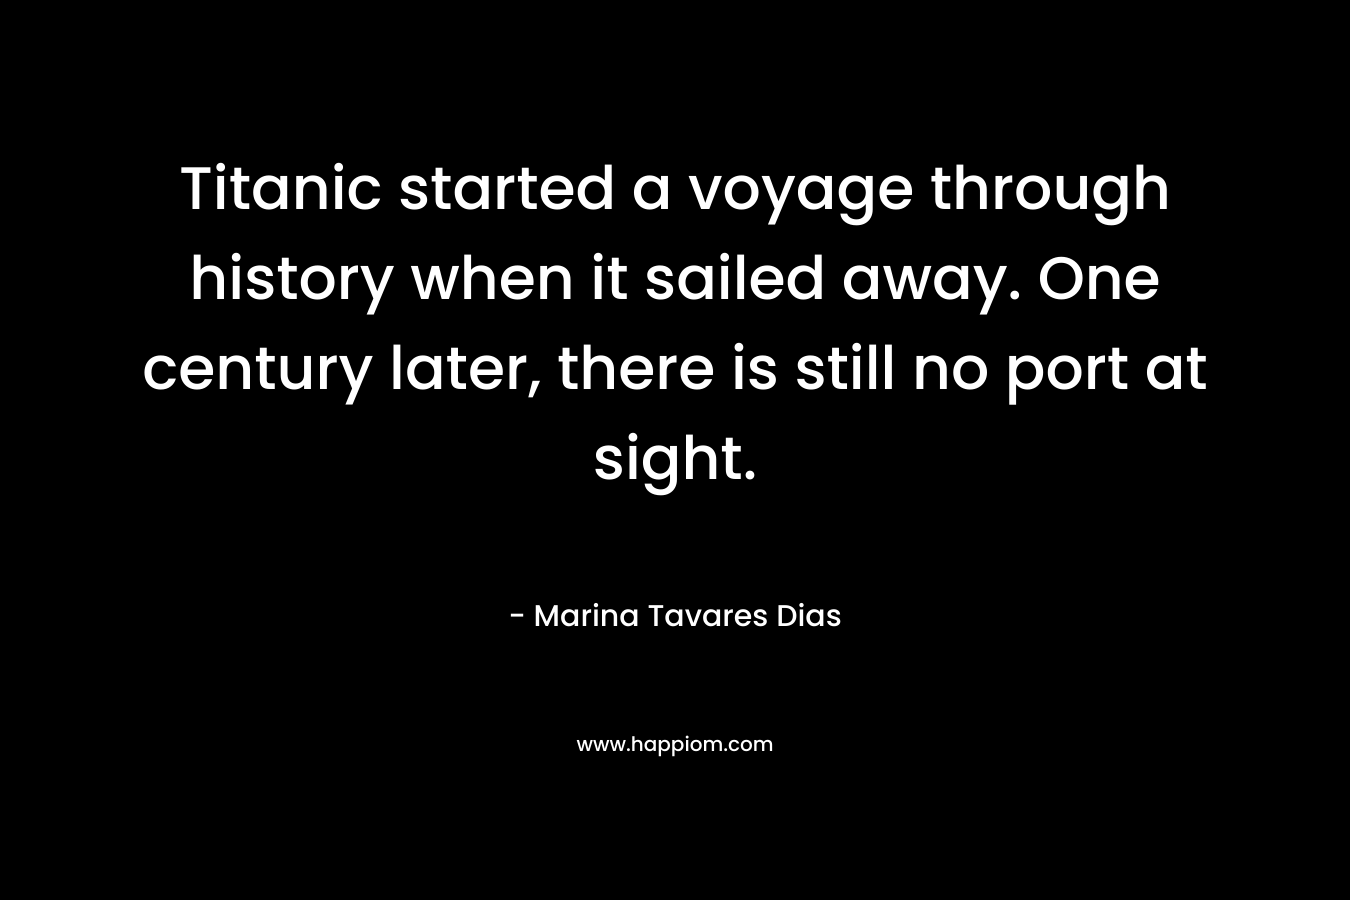 Titanic started a voyage through history when it sailed away. One century later, there is still no port at sight.